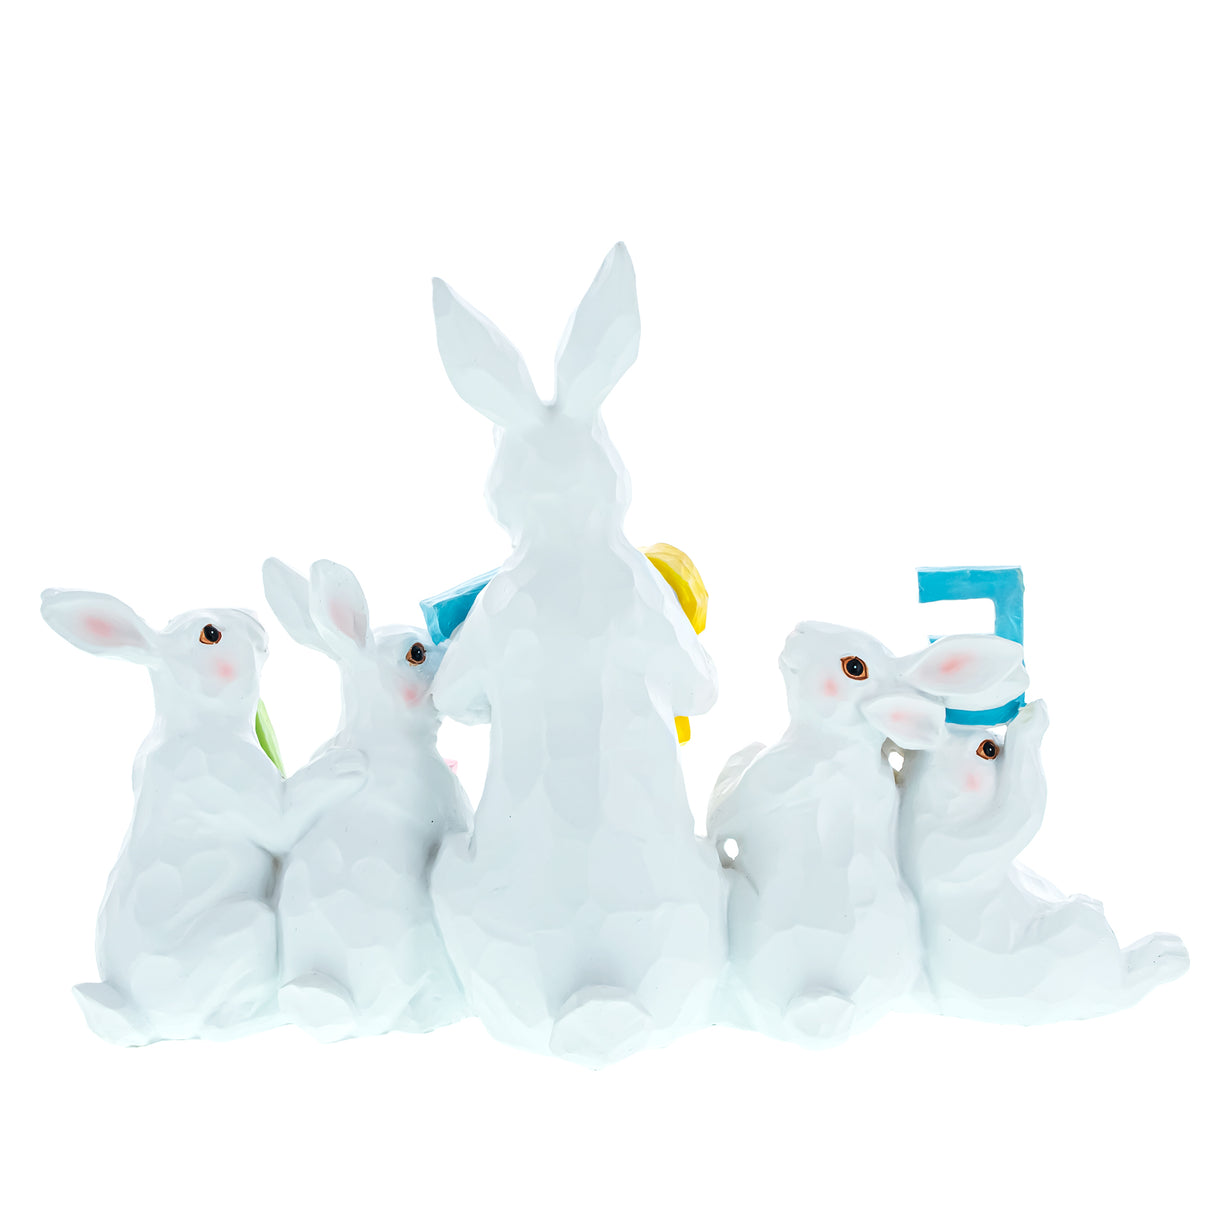 White Bunnies Holding EASTER Letters Figurine 12 Inches ,dimensions in inches: 8.7 x 3 x 12.3